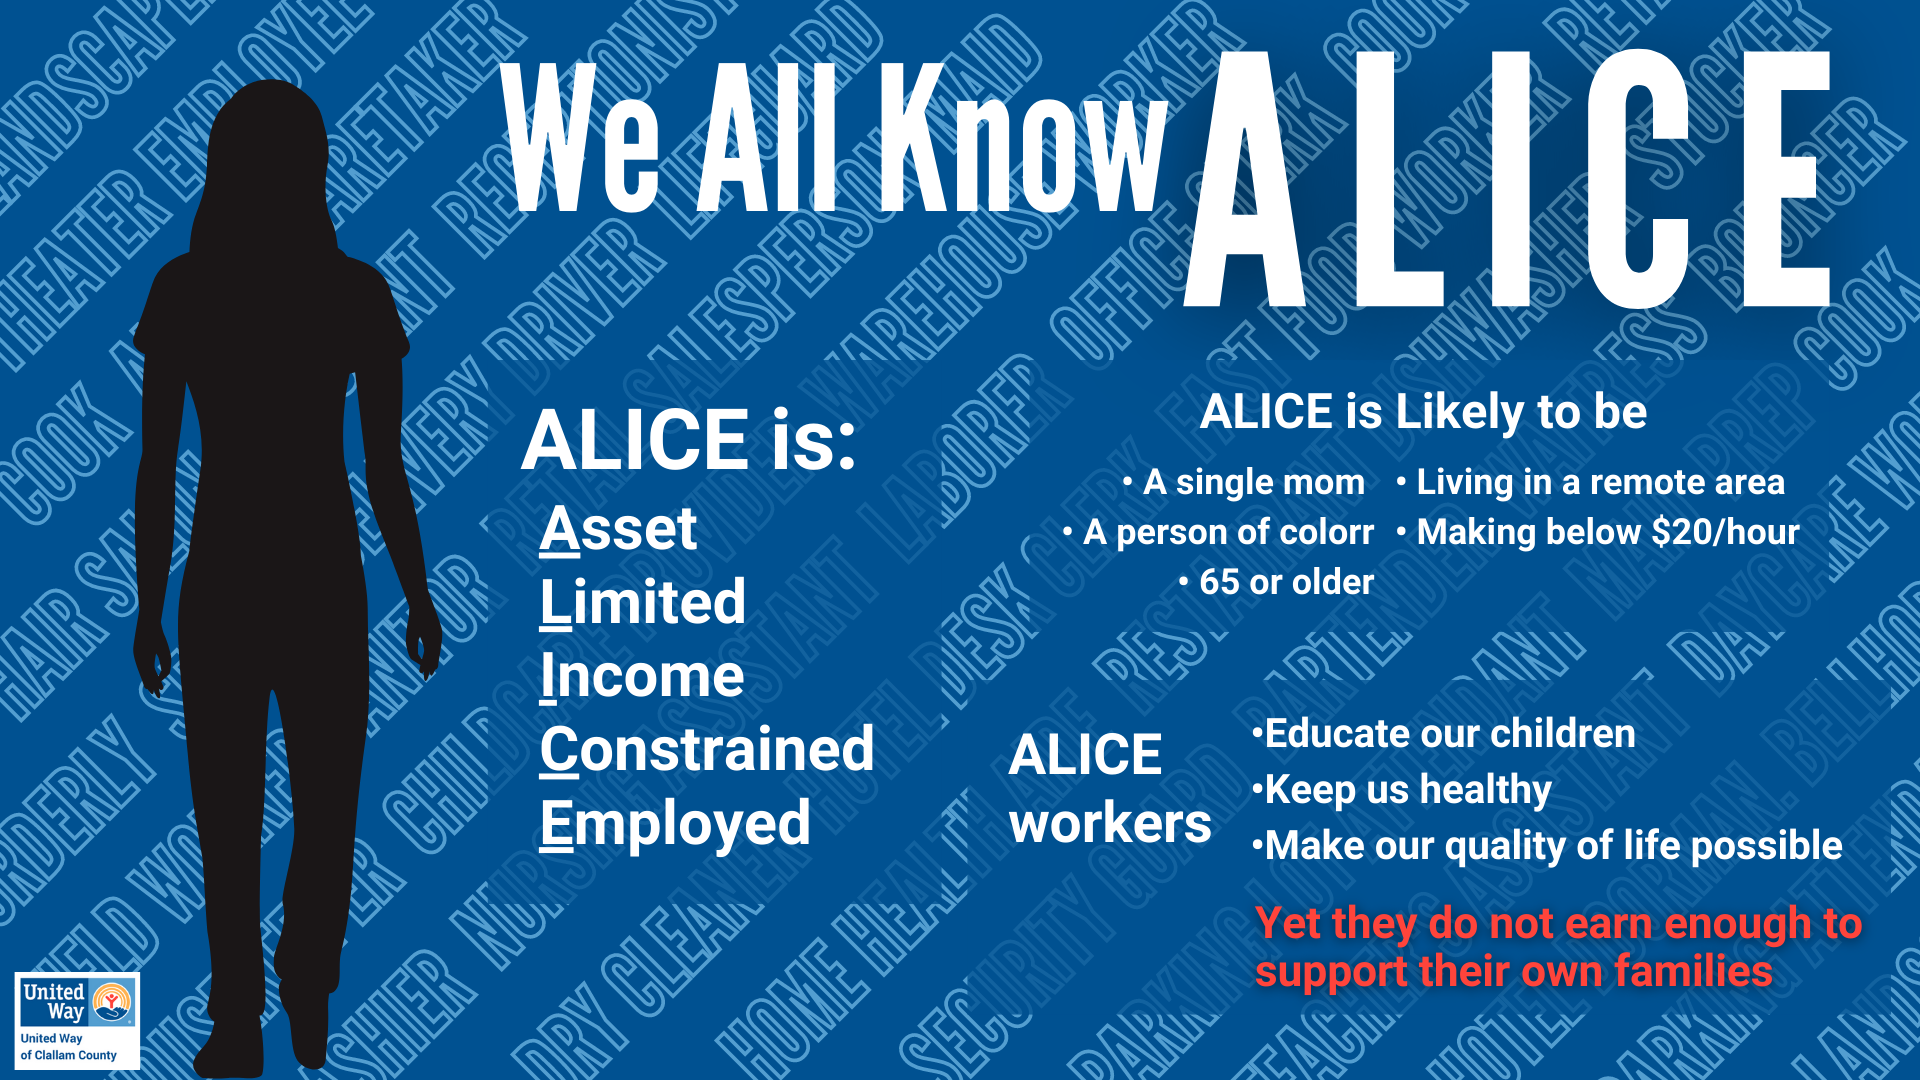 Silhouette of a woman on a blue background with many job titles written on it. Large text reads "we all know Alice"